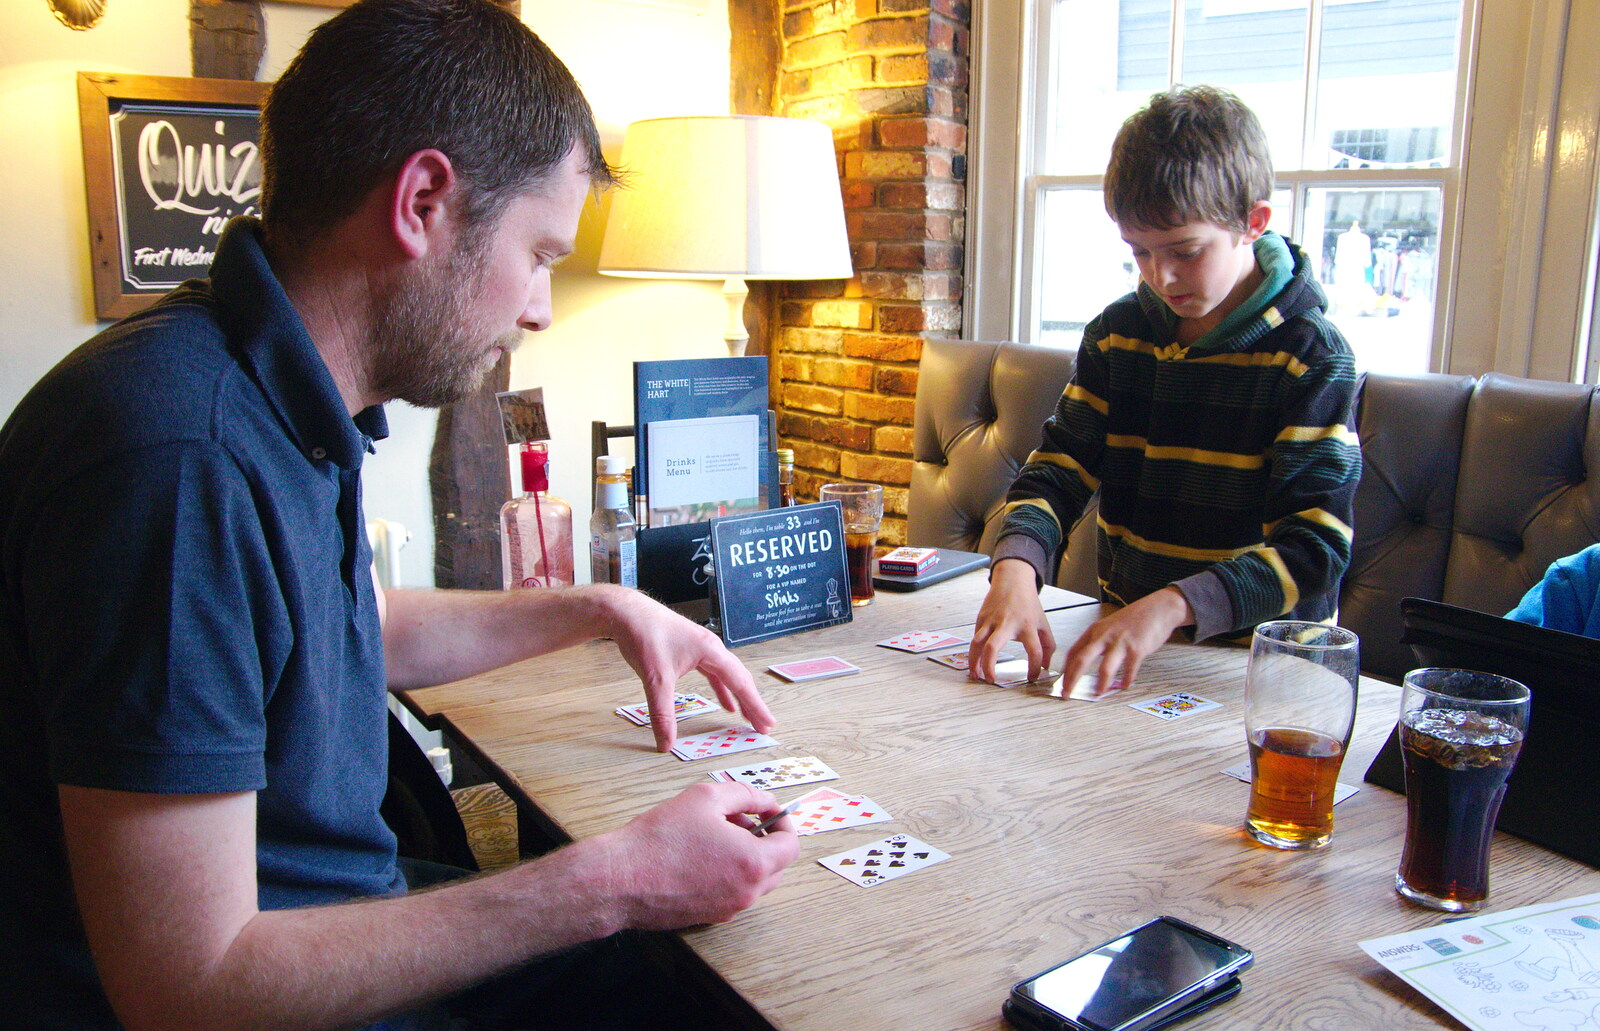 The BSCC Bike Ride 2019, Coggeshall, Essex - 11th May 2019: Phil and Fred play cards